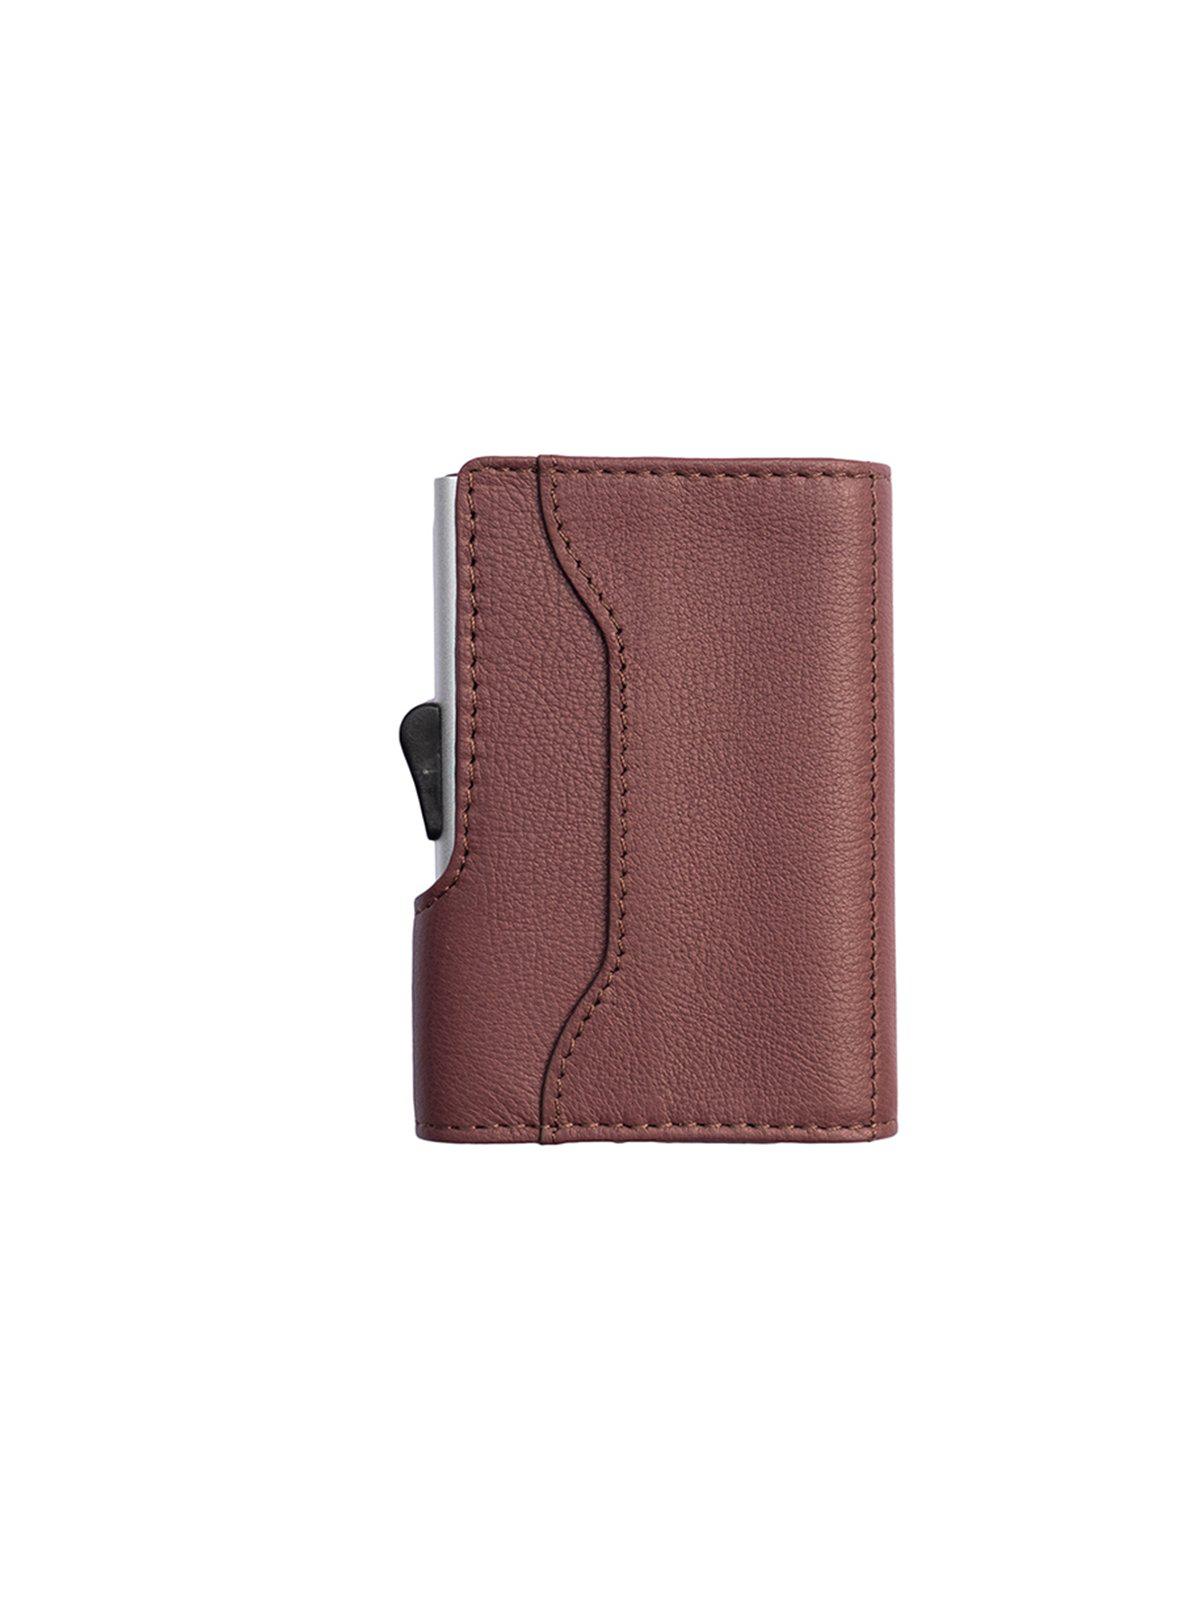 C-Secure Italian Leather RFID Wallet Bordo - MORE by Morello Indonesia